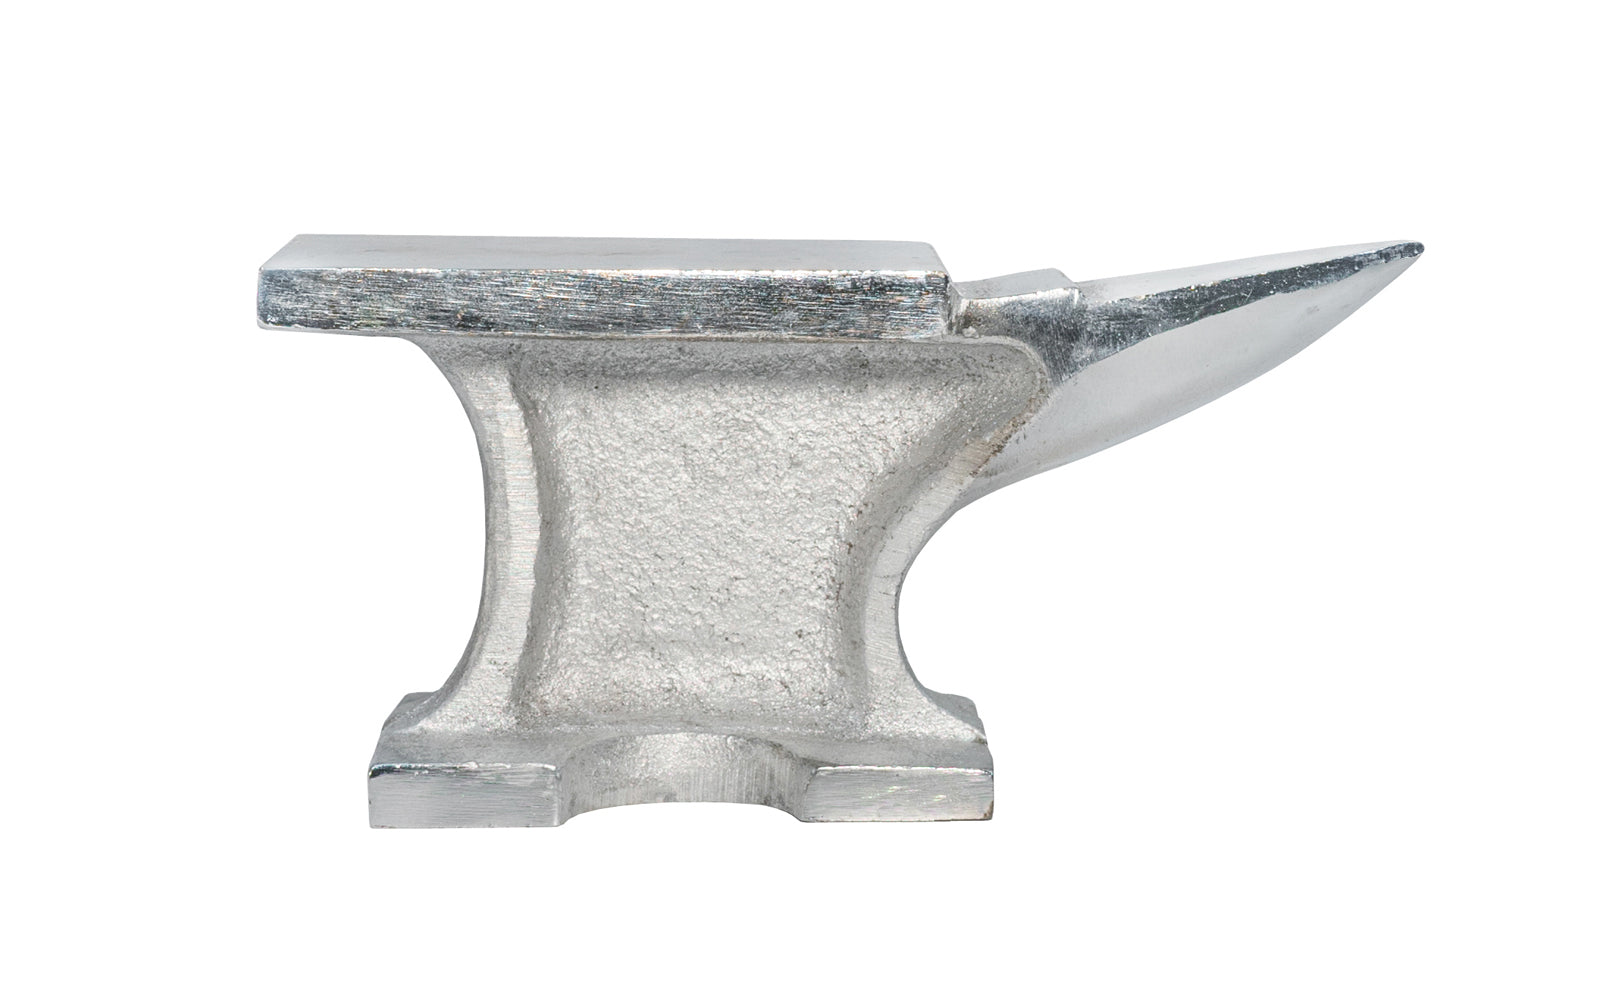 Chrome Plated Steel Single-Horned Anvil - 1.2 lb - This jeweler's anvil is good for silversmiths & jewelers. Use this anvil for flattening, shaping, forming, bending, repairing, & great for detail wire - 5" Long  x 2-1/2" Wide  x 1-1/2" High